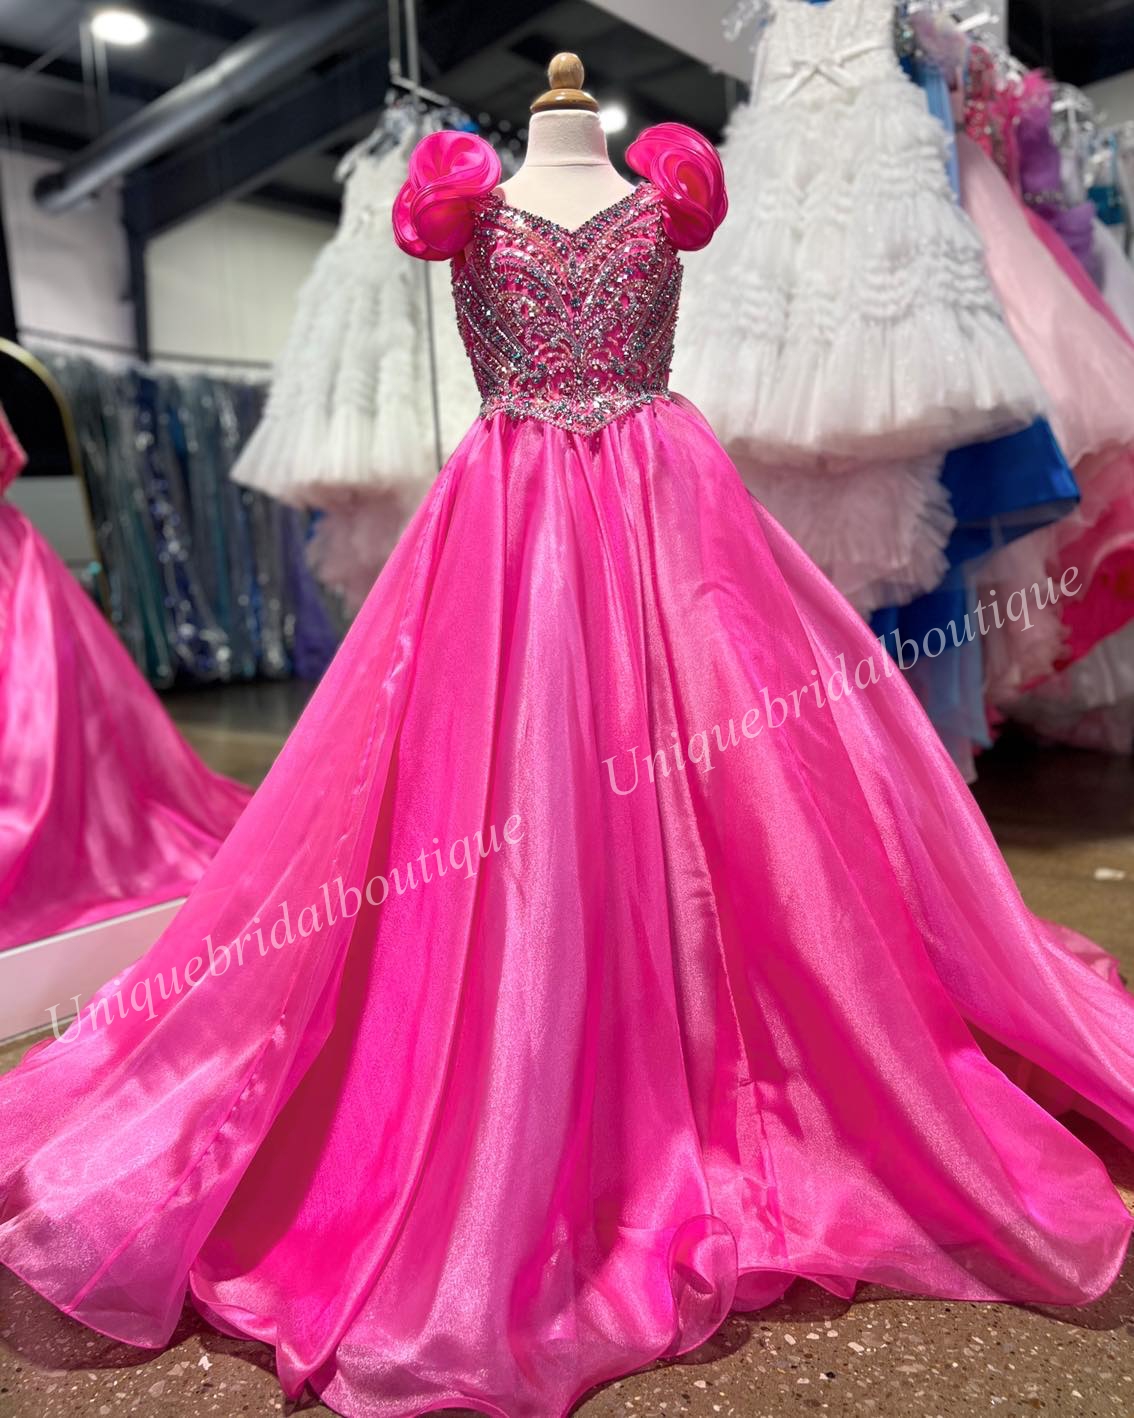 Hot Pink Girl Pageant Dress Teens Metallic Organza Little Kid Princess Birthday Formal Party Gown Toddler Preteens Tiny Young Junior Miss Flower Mint Ruffle Sleeves